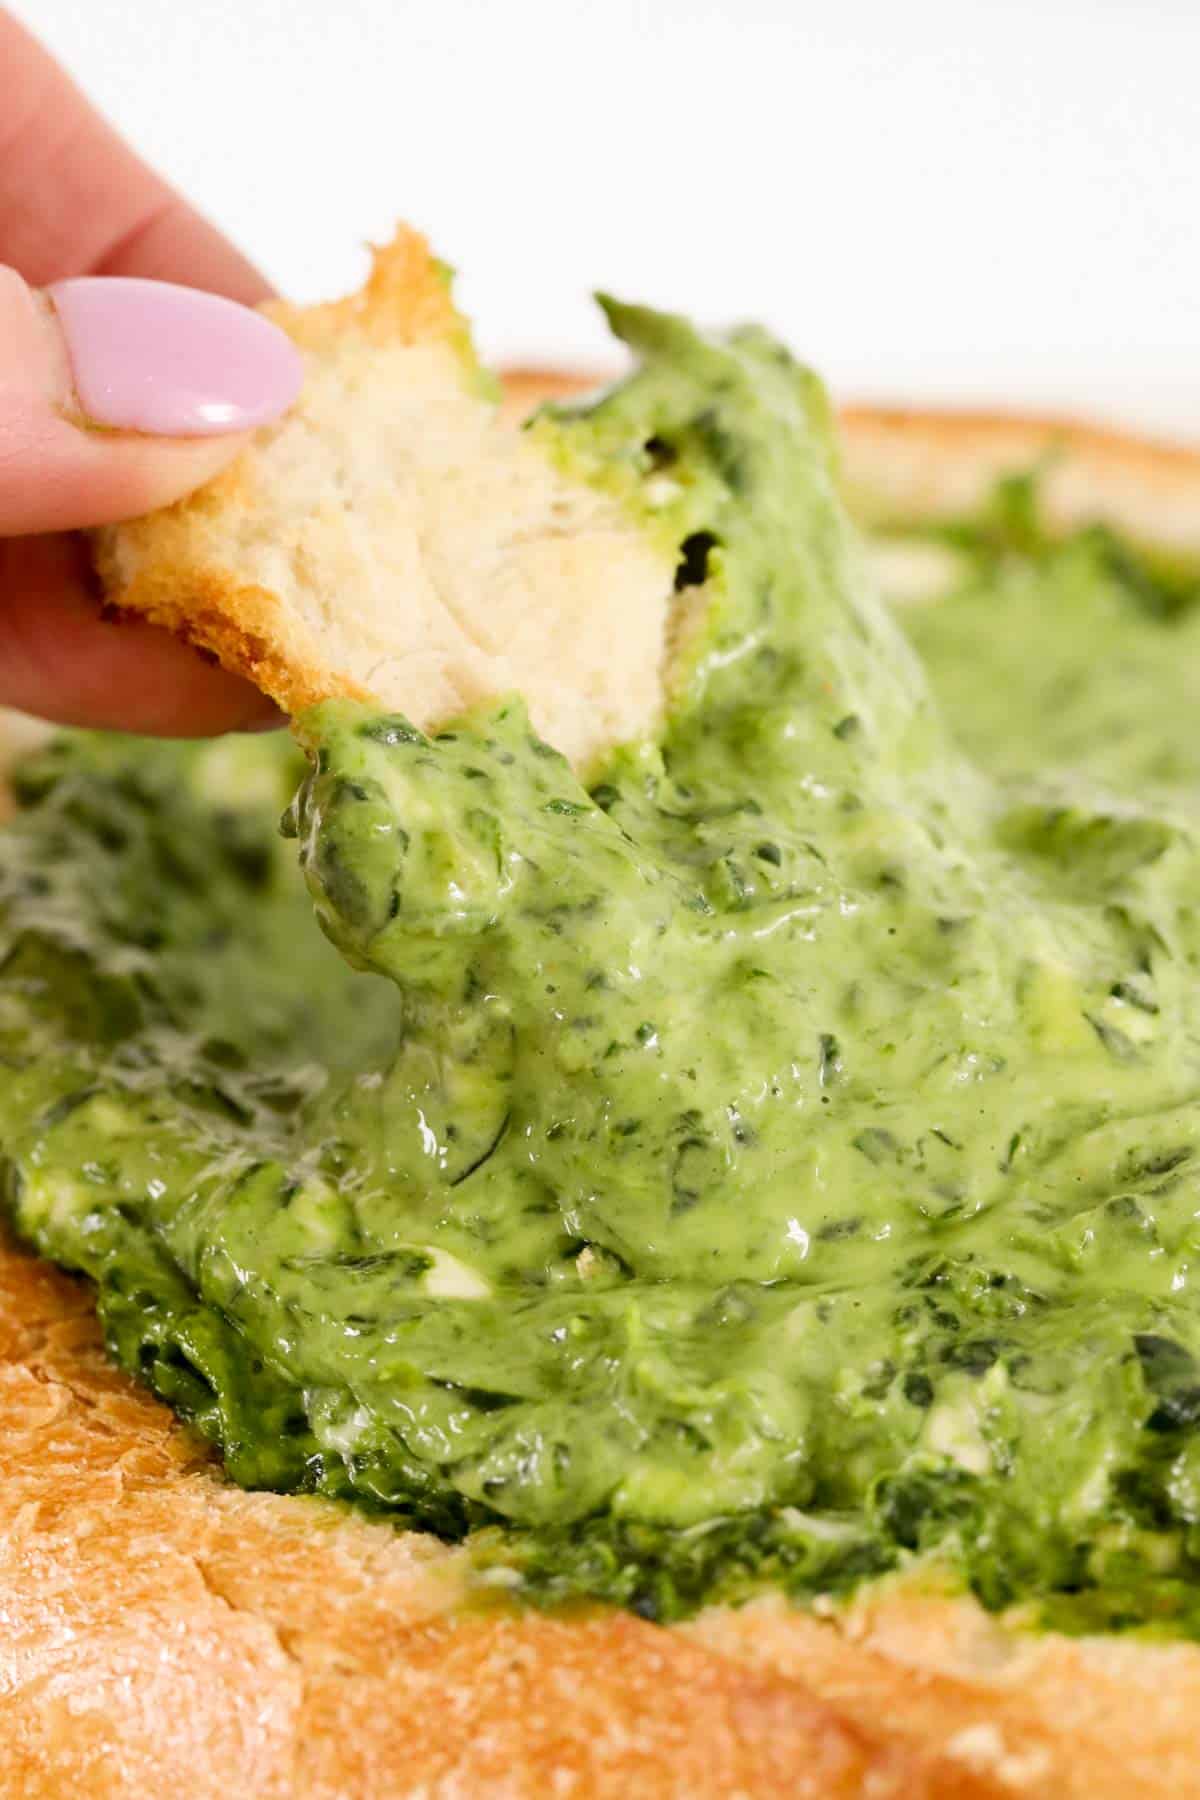 A hand dipping a piece of bread into green spinach dip in a cob loaf.